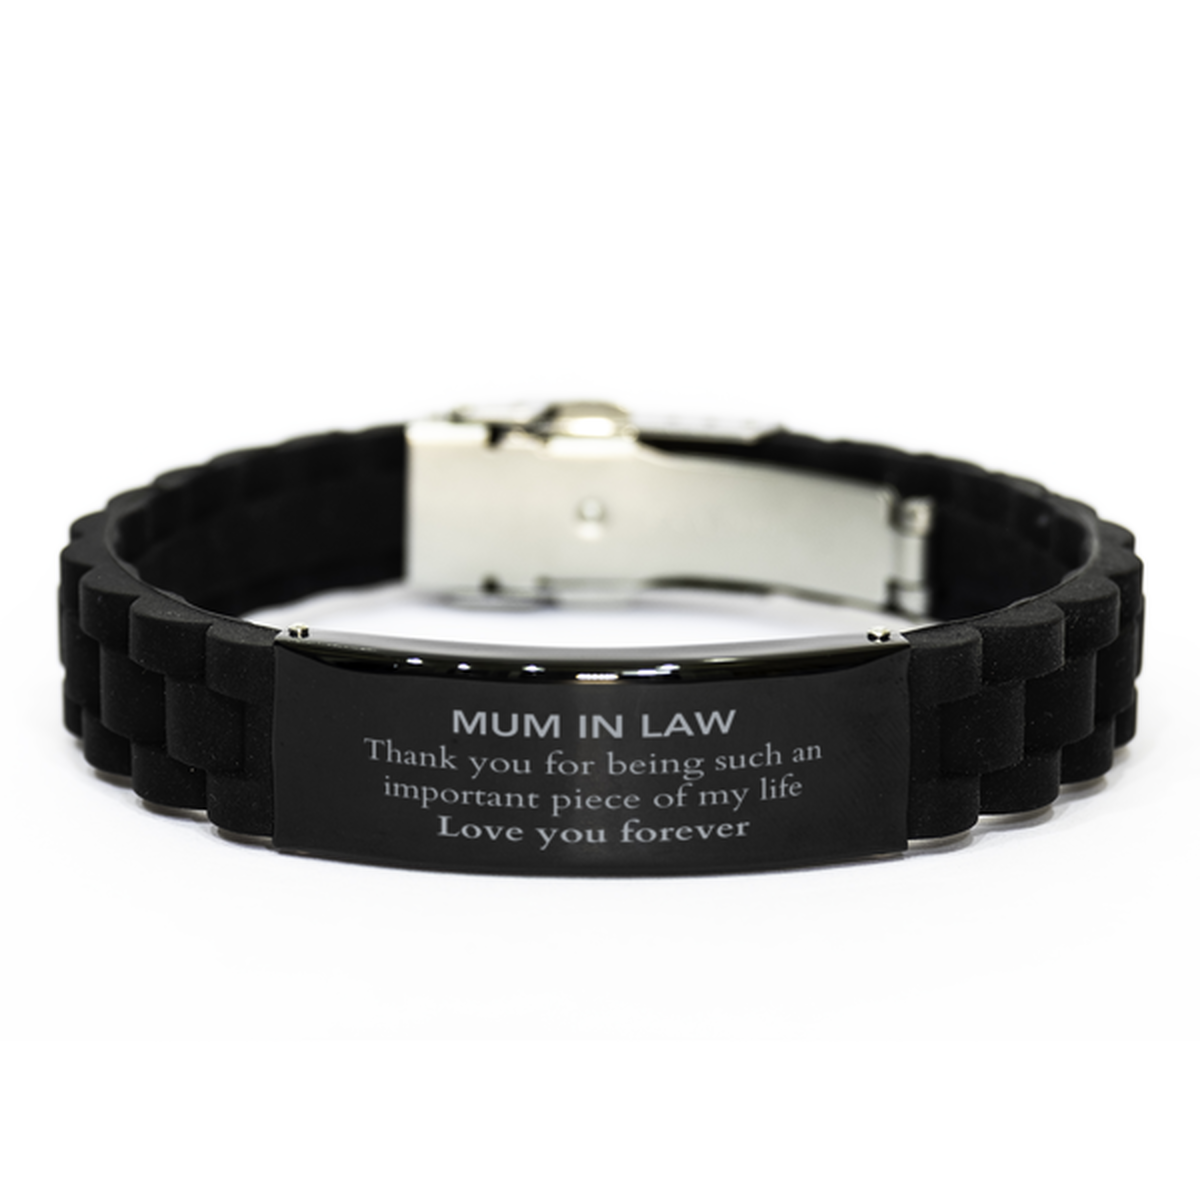 Appropriate Mum In Law  Black Glidelock Clasp Bracelet Epic Birthday Gifts for Mum In Law  Thank you for being such an important piece of my life Mum In Law  Christmas Mothers Fathers Day